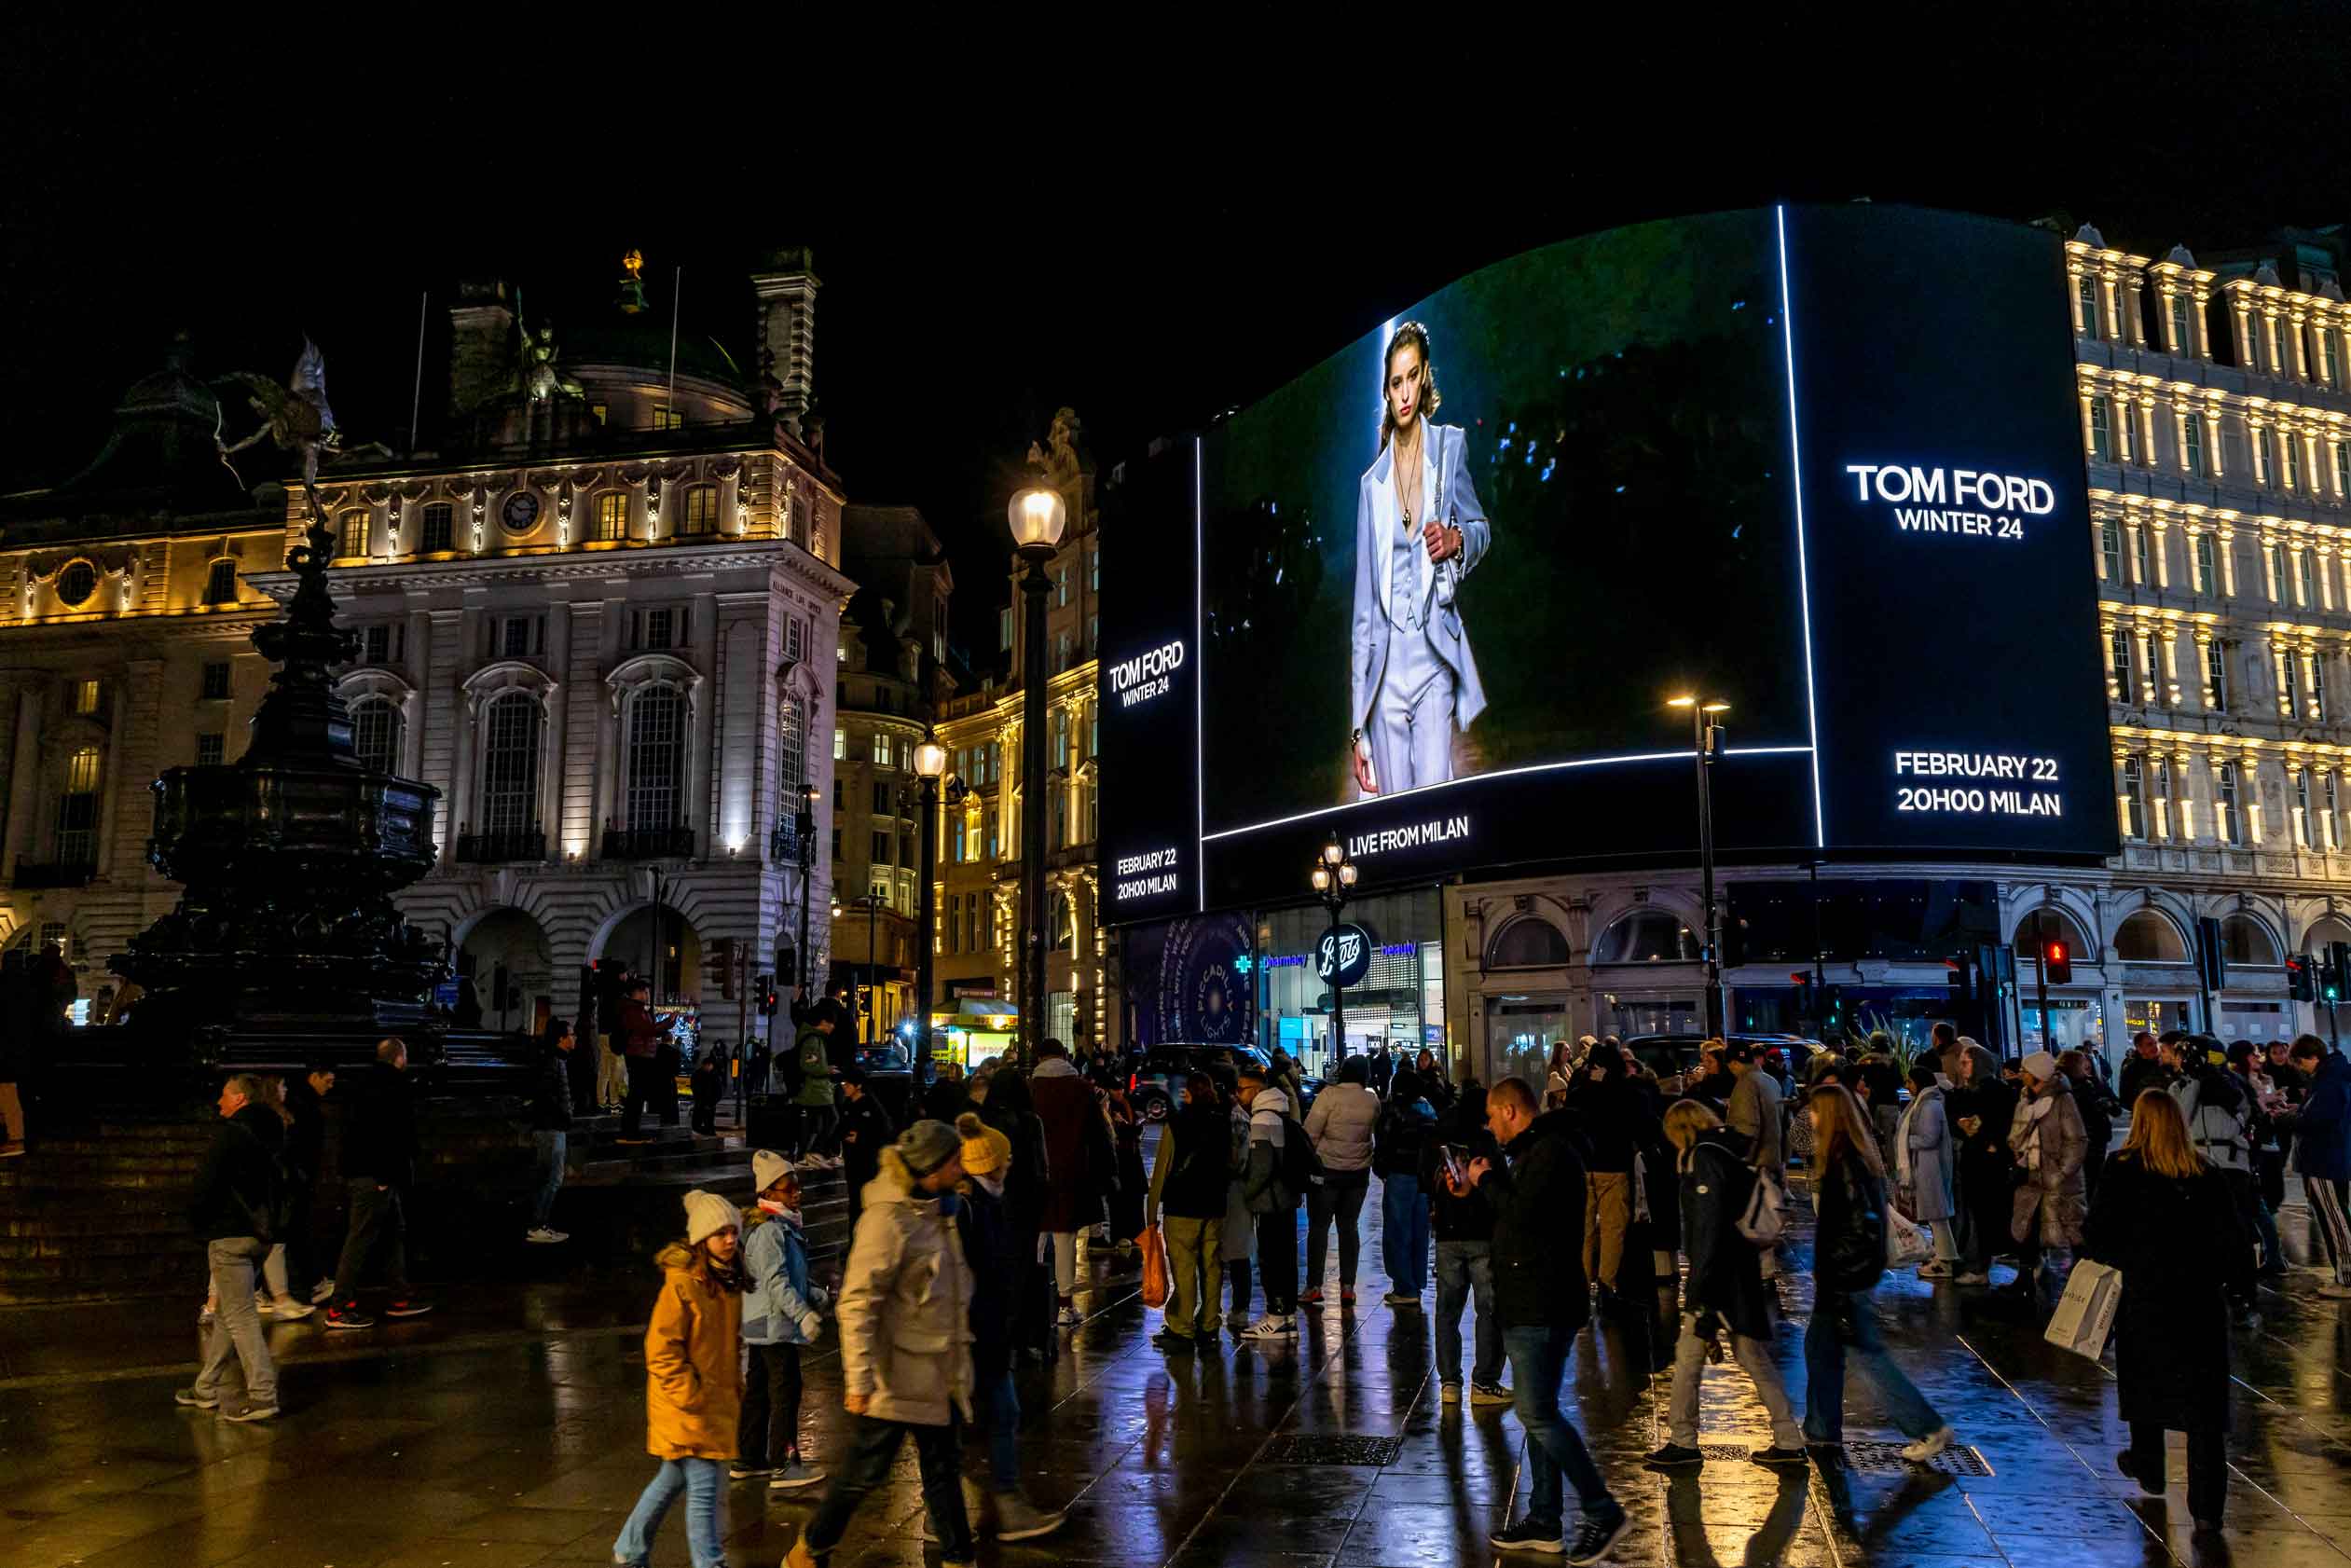 DOOH Campaign of Tom Ford from Milan Fashion Week